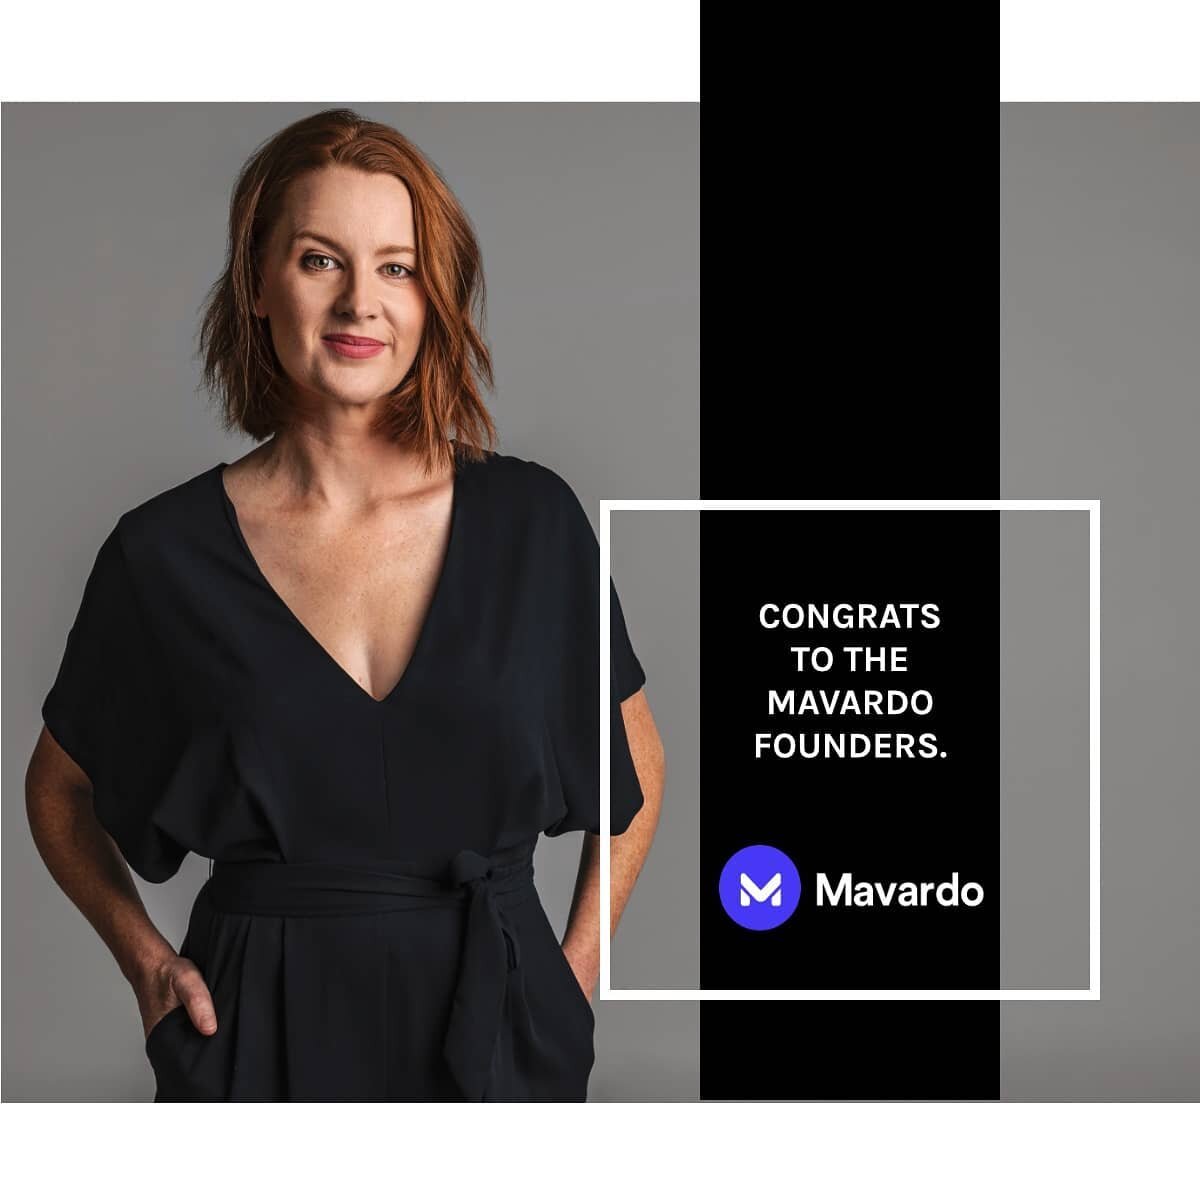 Very excited to be invited as a Mavin on the @_mavardo_ team. 

Book a call today with one of the impressive industry experts and leaders. 

Link in bio.

#microconsulting #mavardo #mentoring #startup #innovation